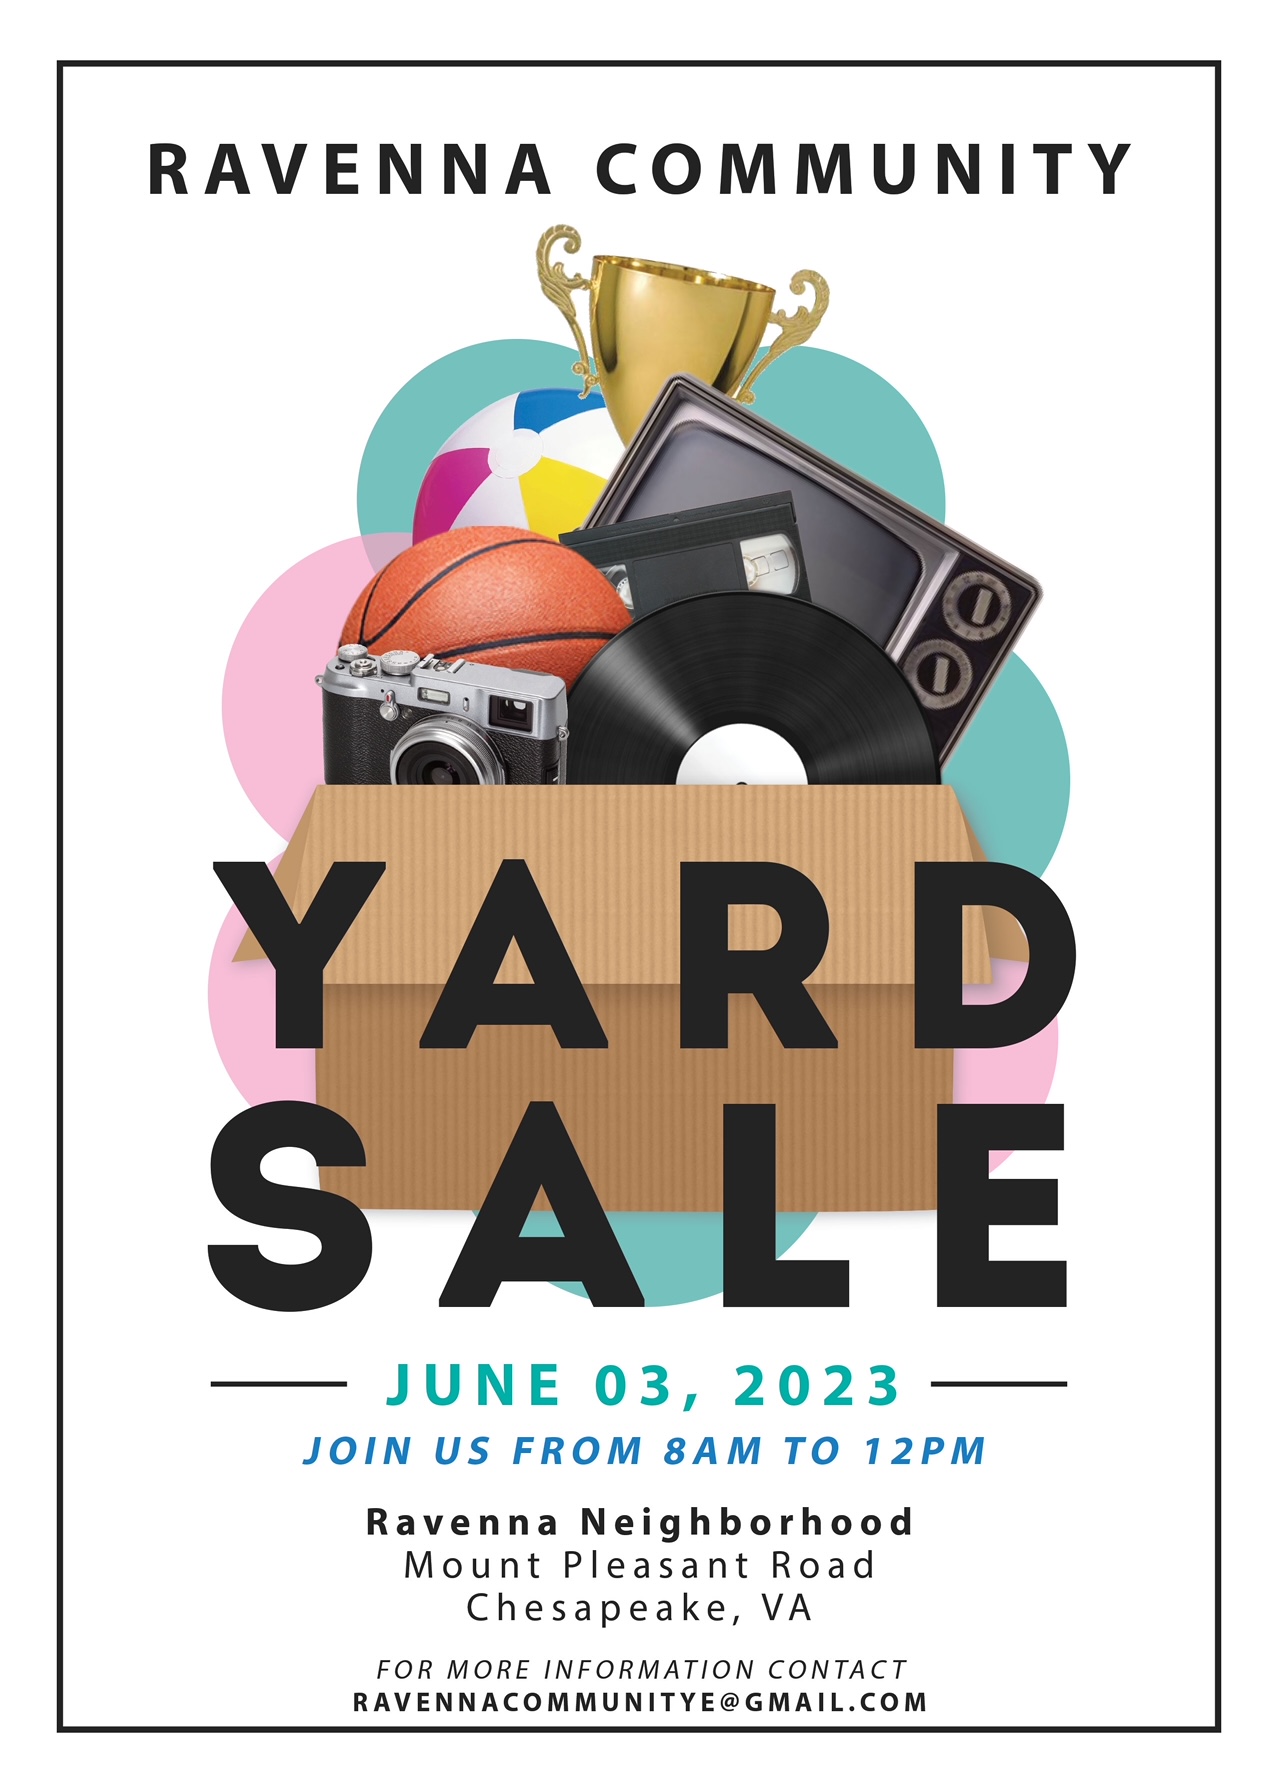 Ravenna Community Yard Sale, June 3 from 8 am to 12 pm on Mount Pleasant Road in Chesapeake, VA.